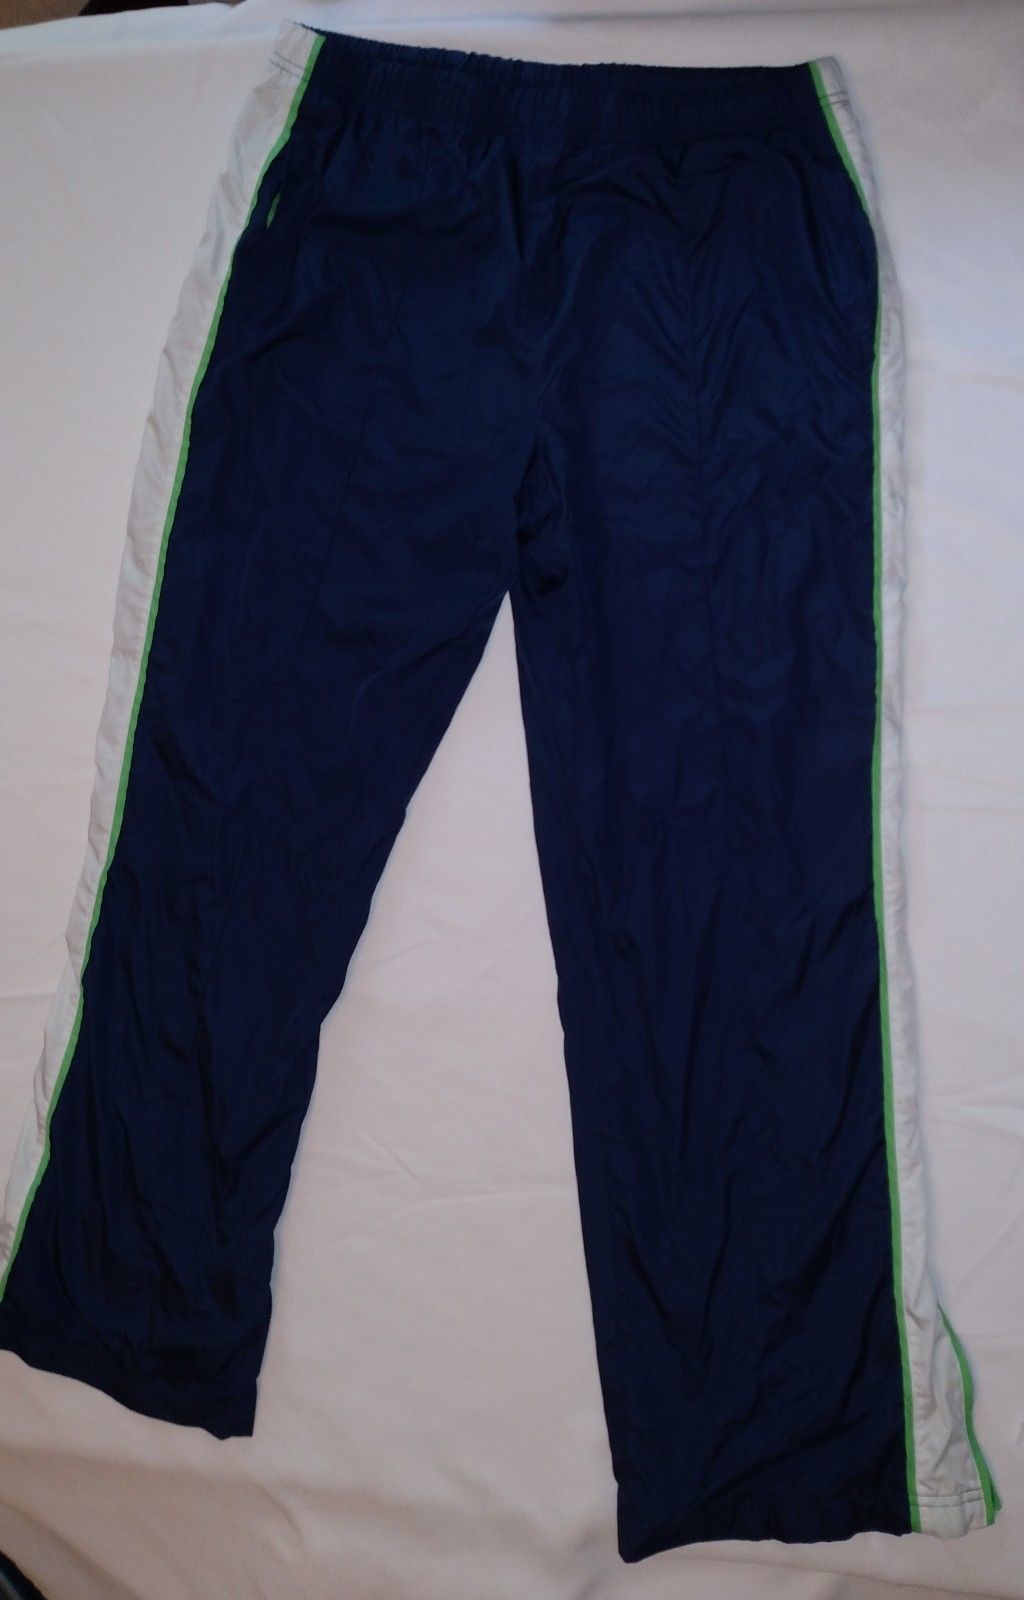 ATHLETIC WORKS Women's Pants Exercise Sports Bottoms 12 - 14 Blue Green White - $24.95